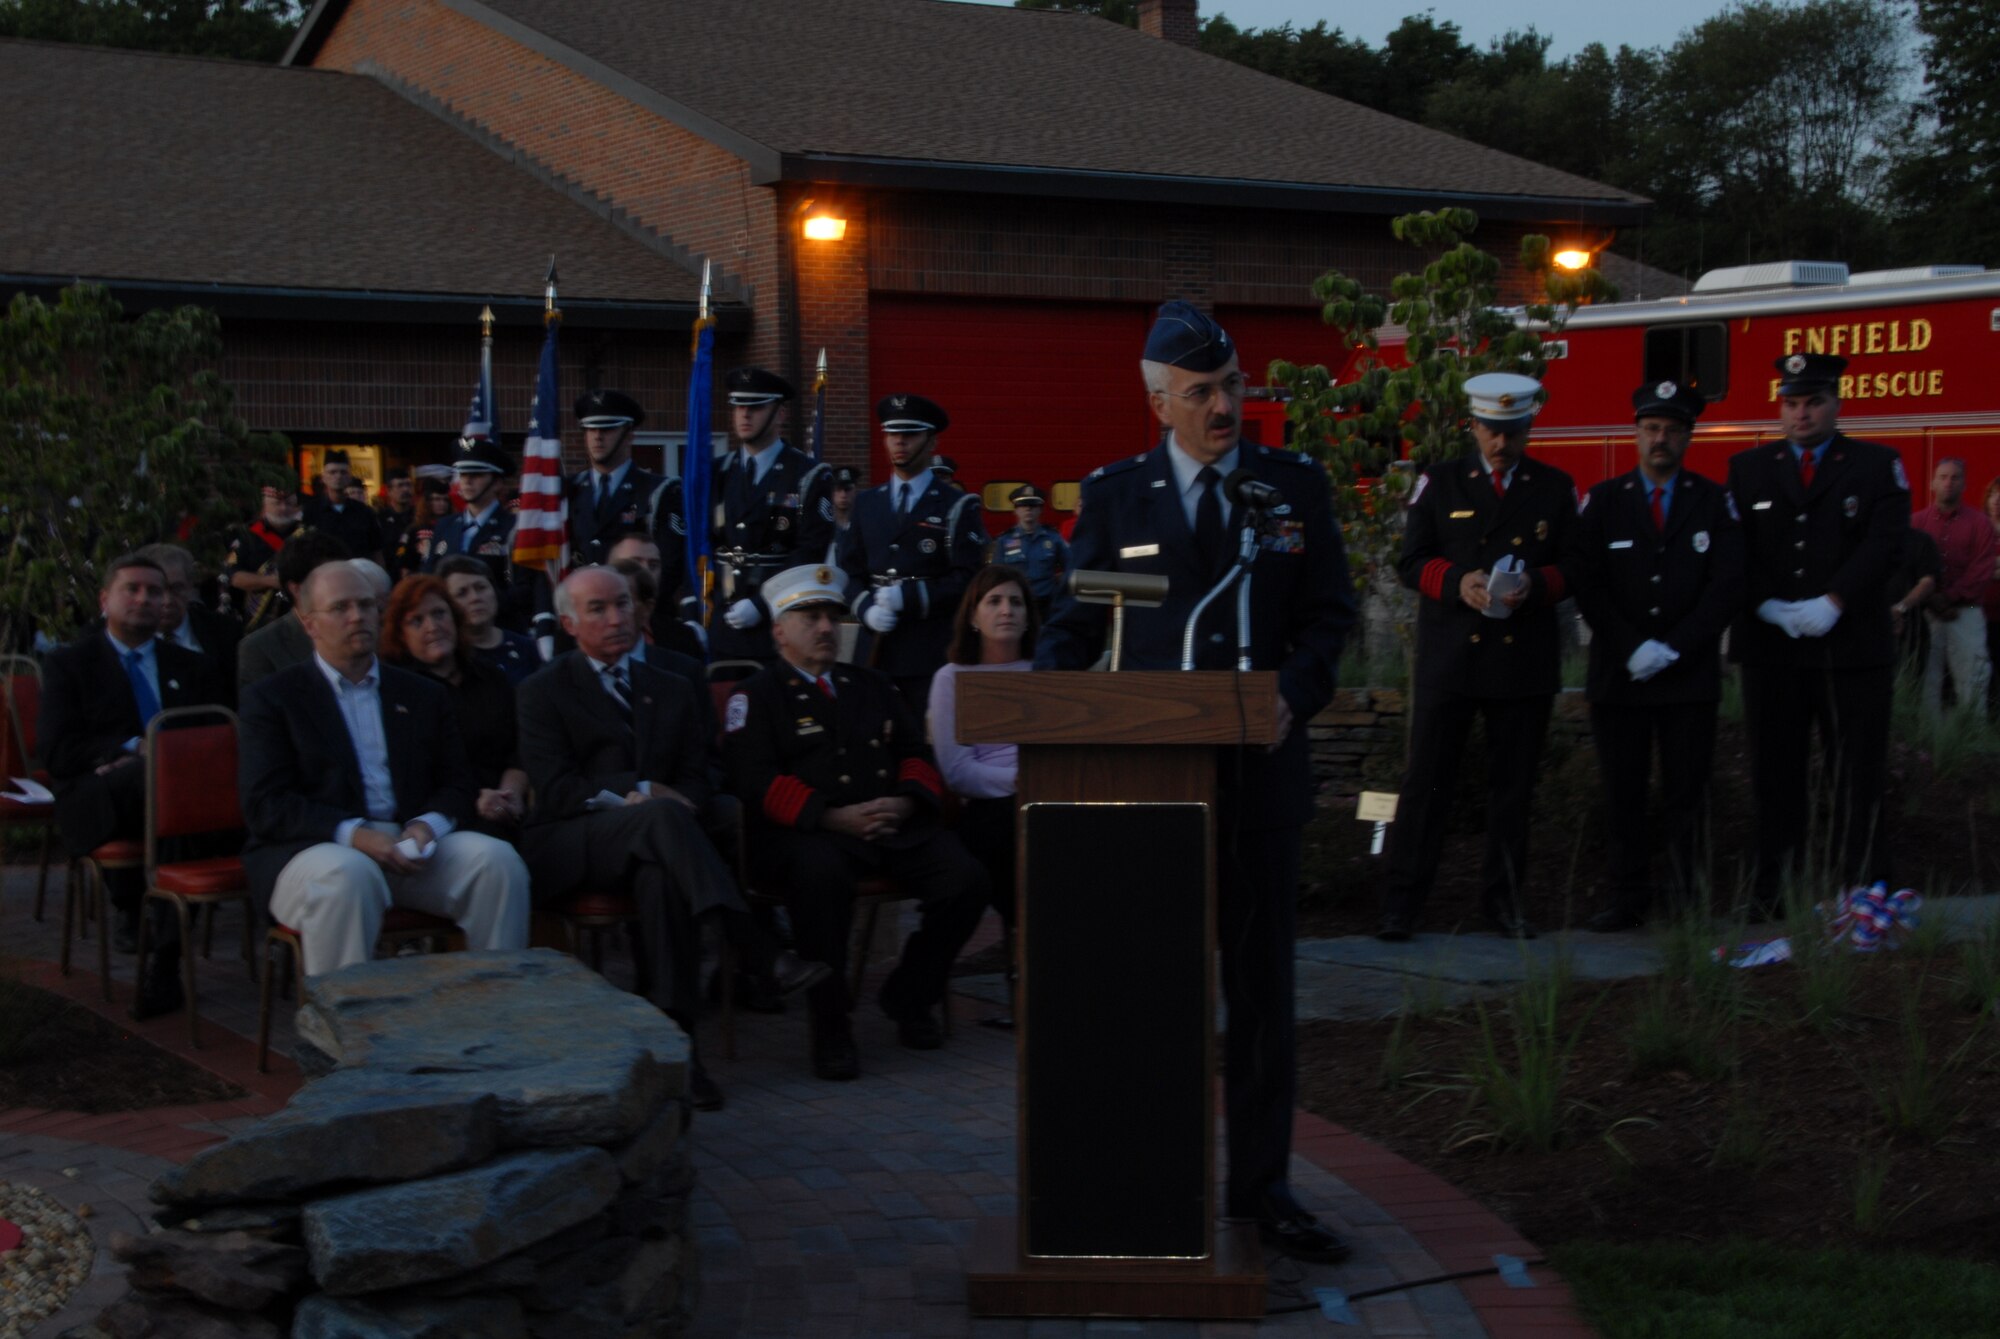 Col. Fredrick R. Miclon, Director of Staff for Air, Joint Force Headquarters, Connecticut Air National Guard, speaks during the 9-11 Memorial Service at the Enfield Fire Department, Enfield, Conn. on September 11, 2008. (U.S. Air Force Photo by Senior Airman Kerry P. Carbonell)
